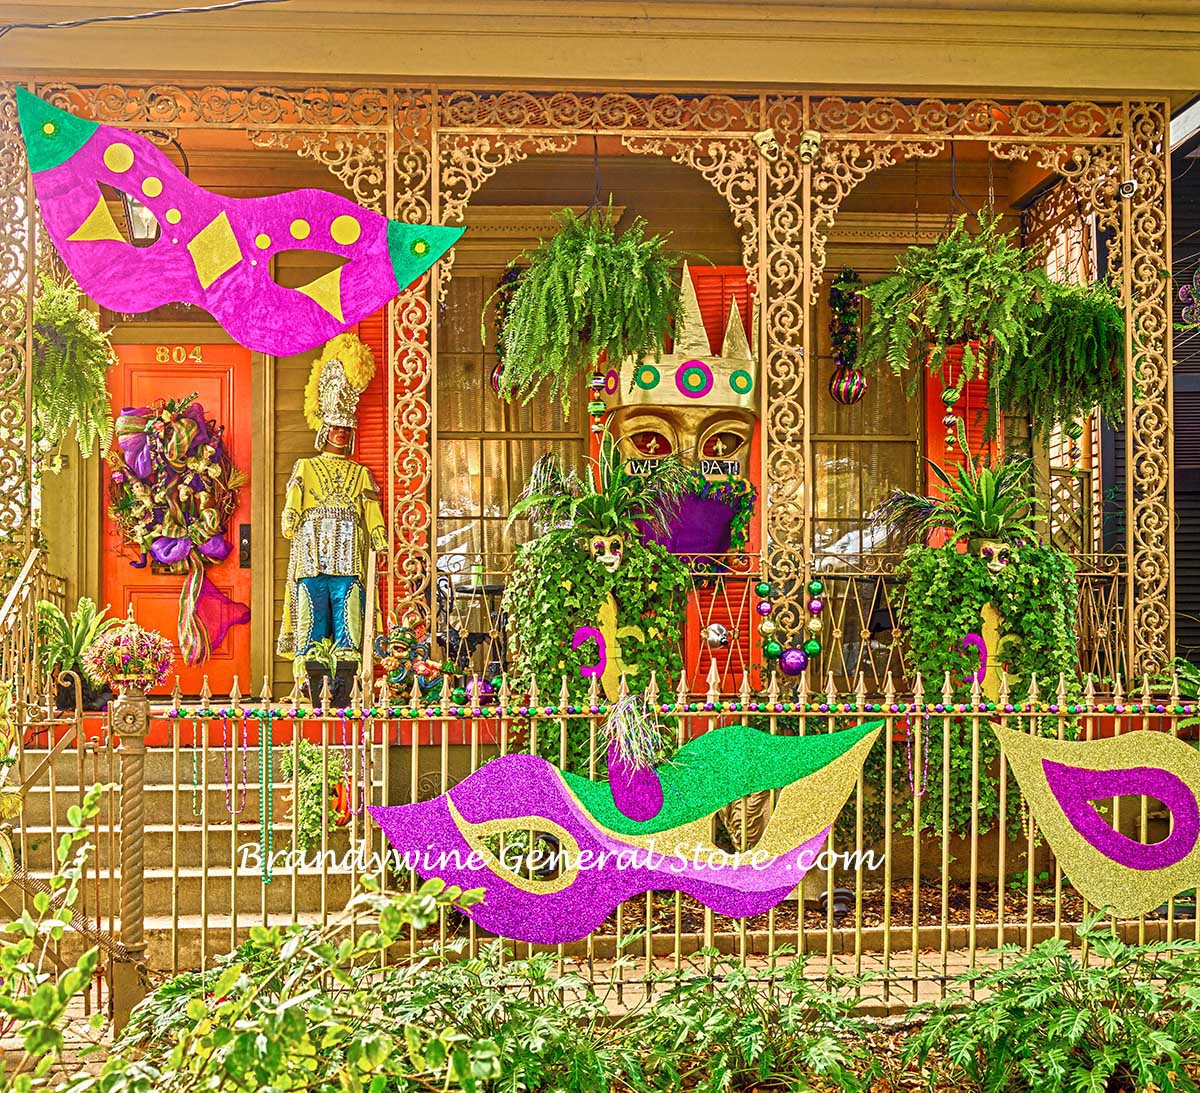 A premium quality art print of Mardi Gras Porch Decorations Amid Hanging Ferns in New Orleans